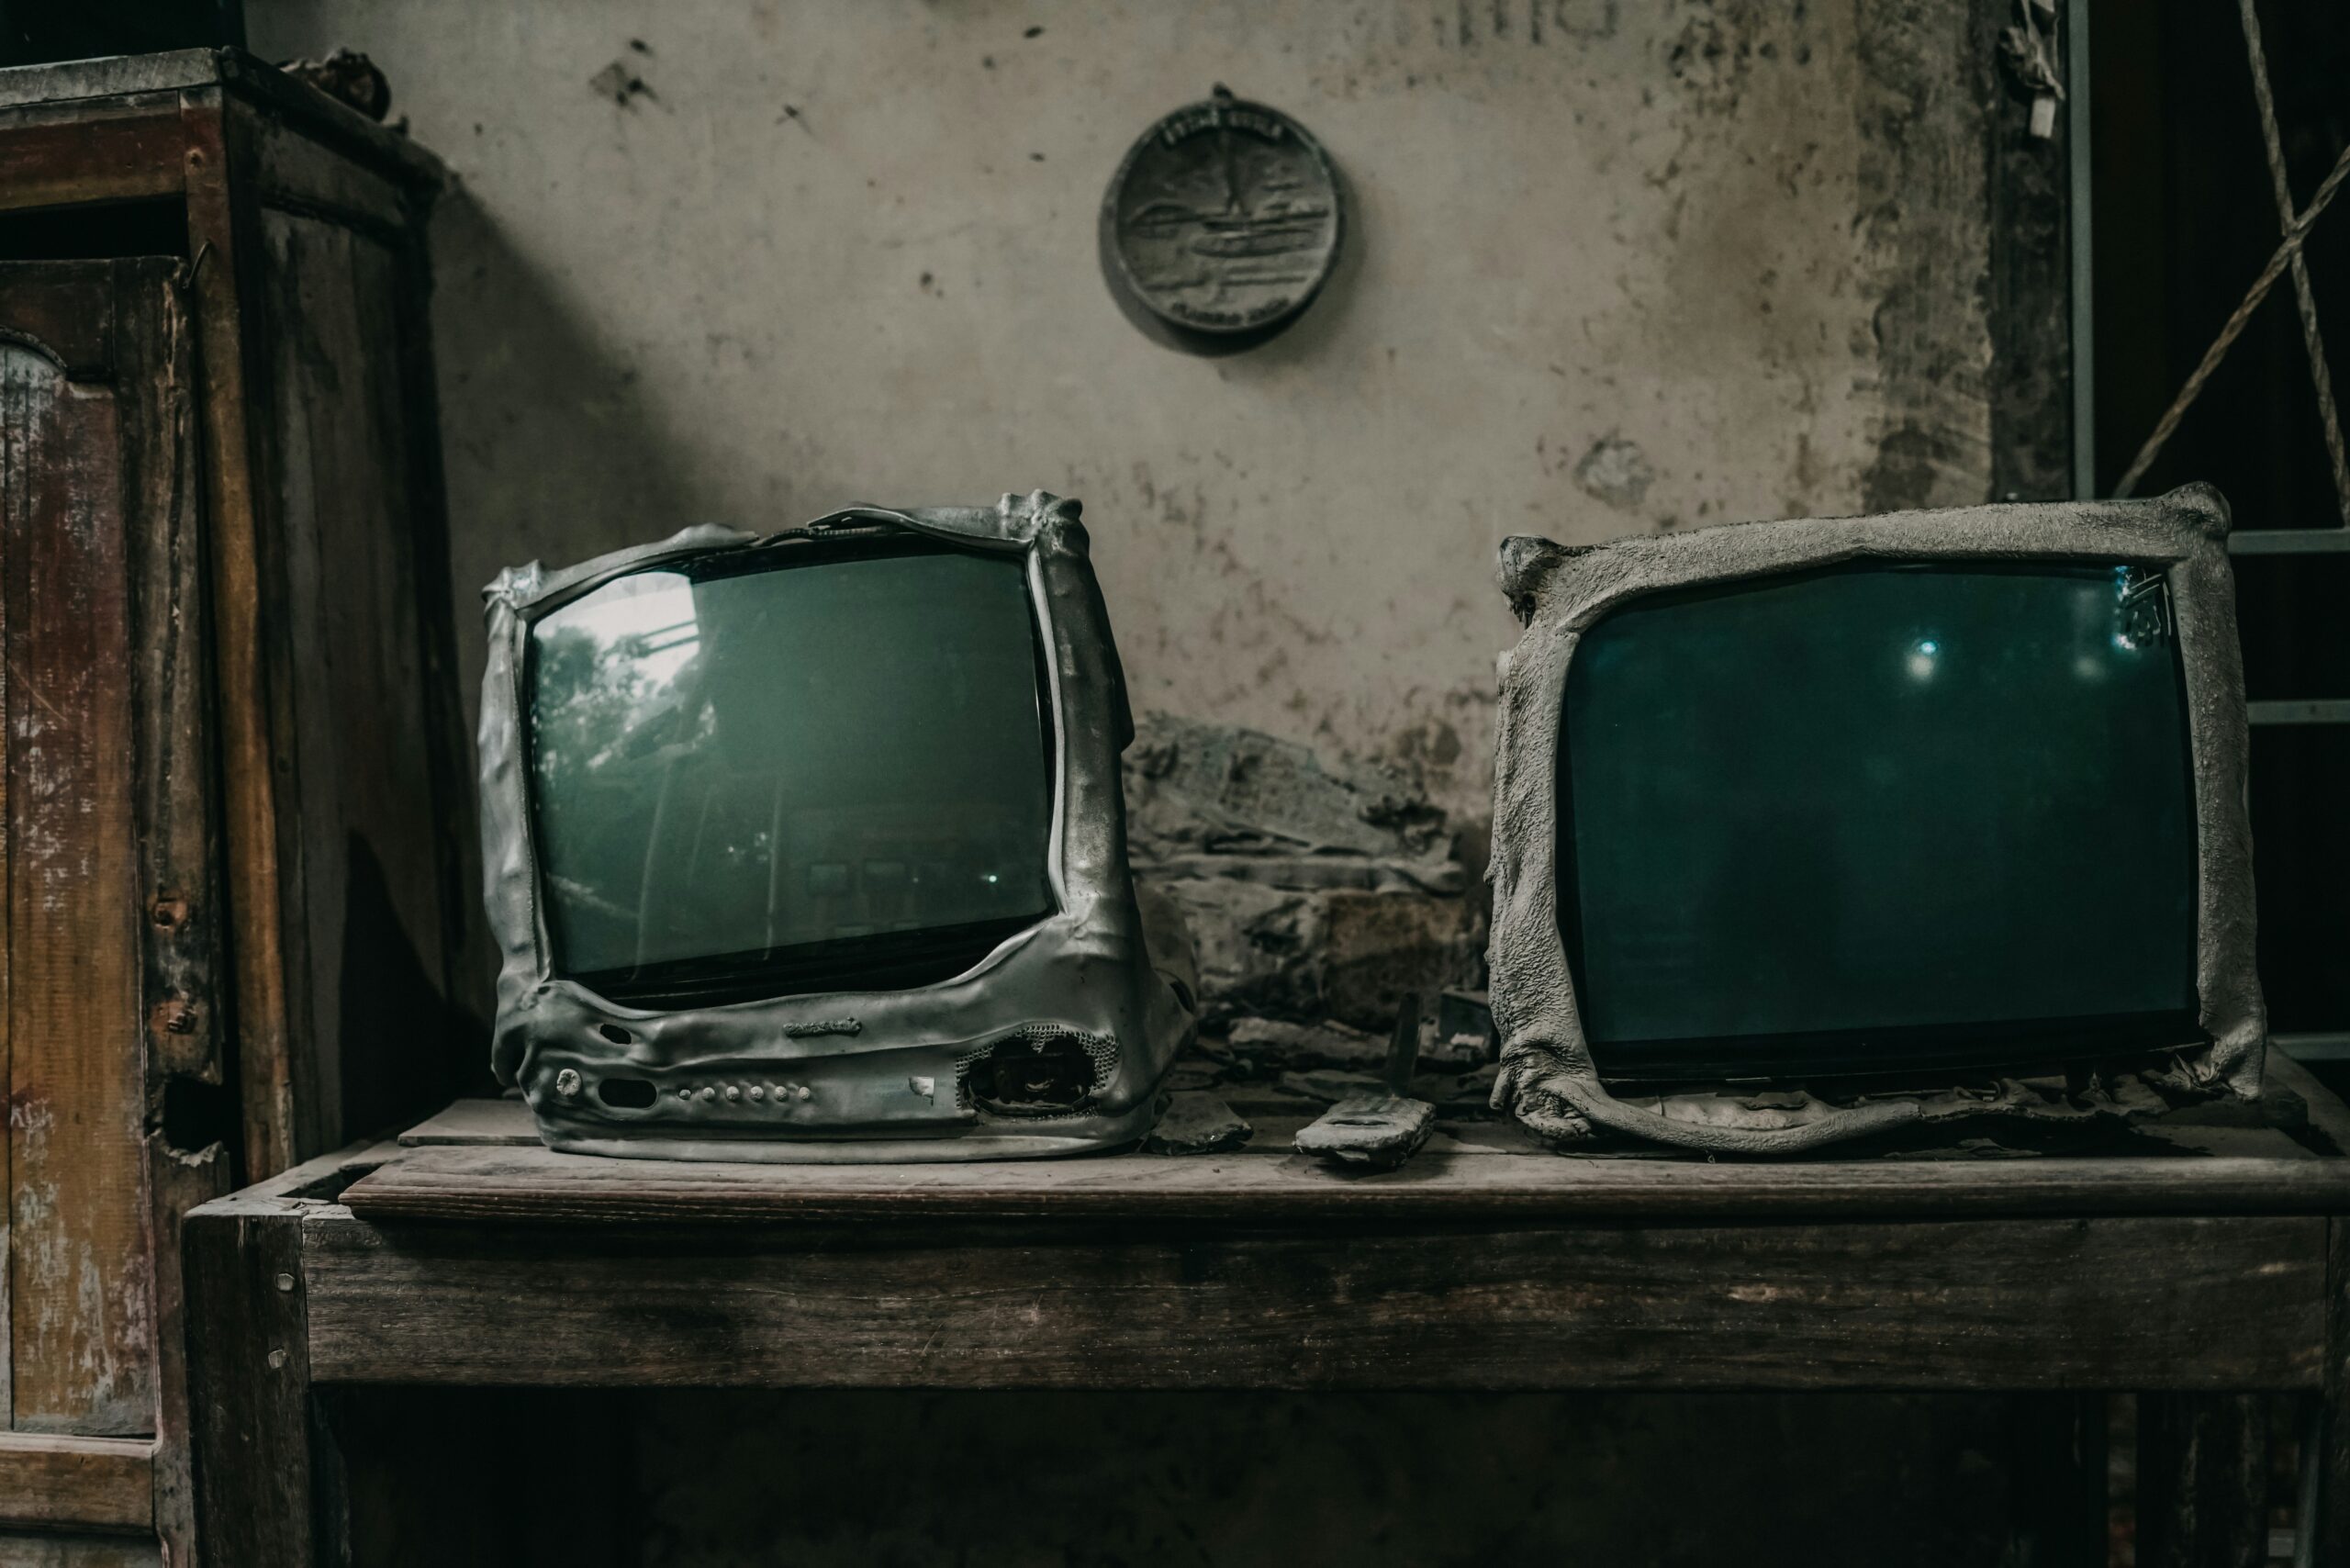 How Technology Has Changed the Way We Watch TV